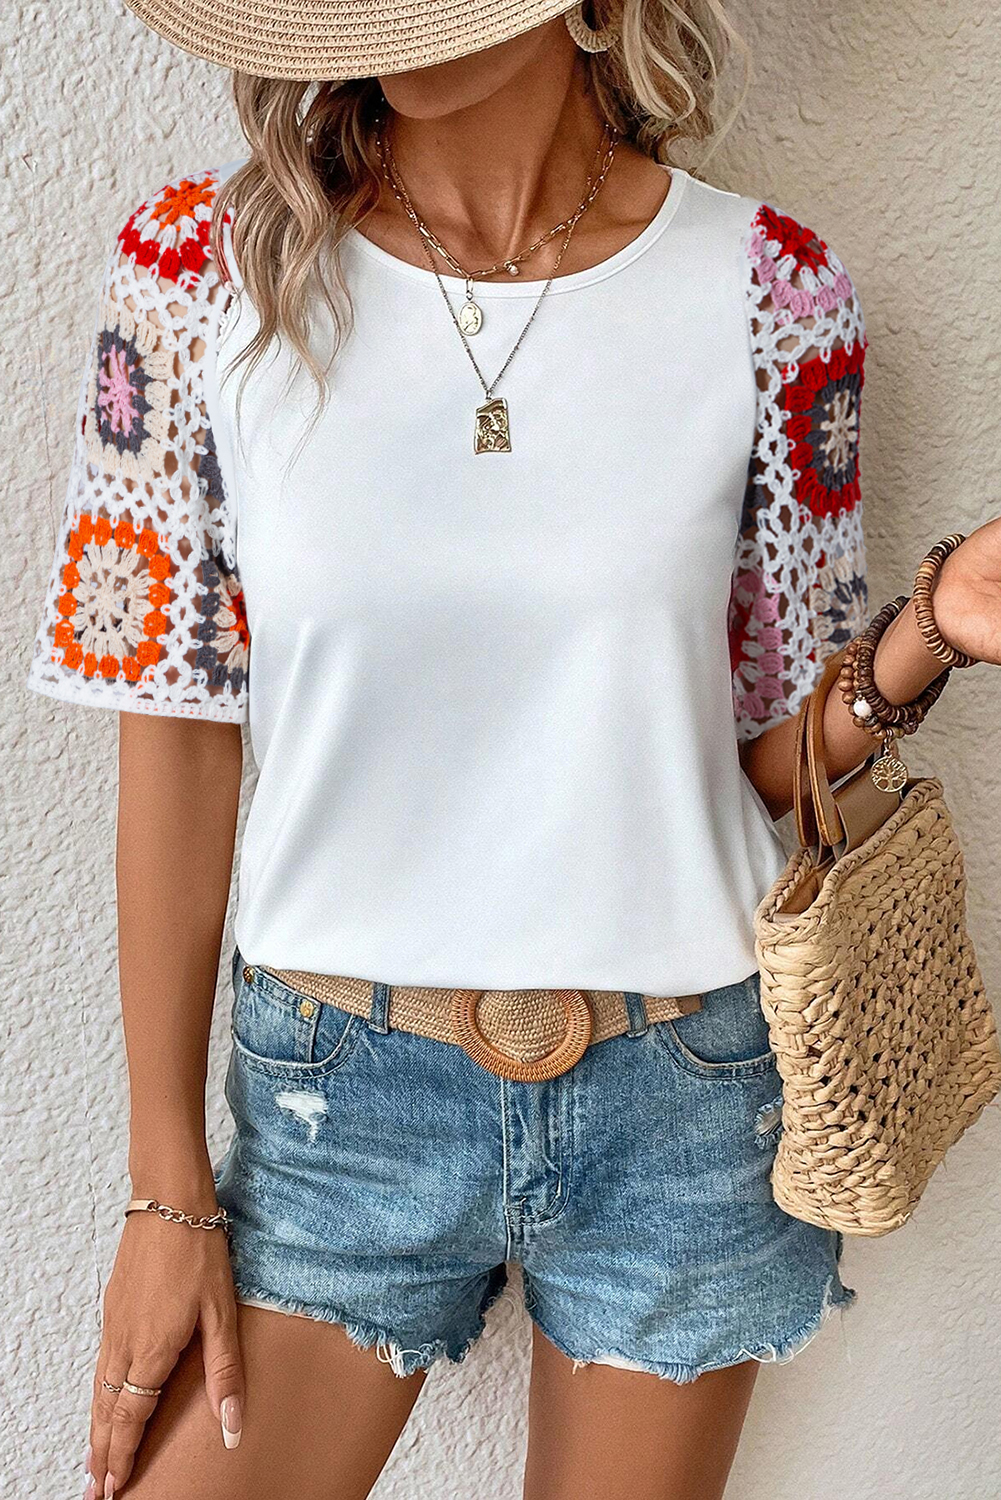 Shewin Wholesale Dropshipping White Floral Hollowed Crochet Sleeve Boho T SHIRT